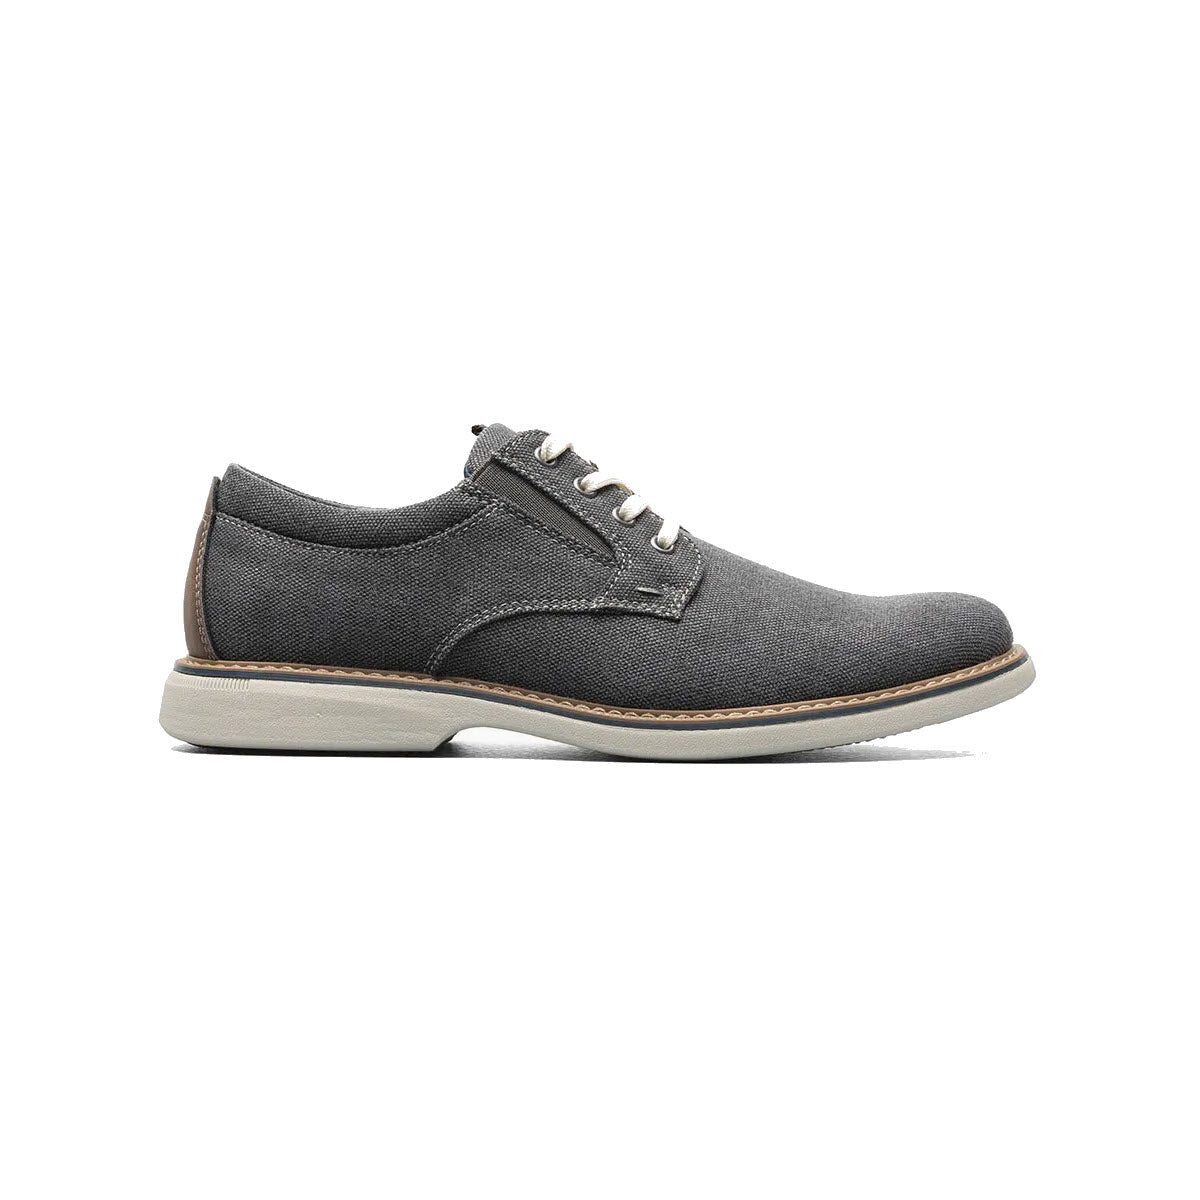 A single Nunn Bush Otto Canvas Plain Toe Oxford Gunmetal shoe with white sole and brown leather details, displayed against a white background.